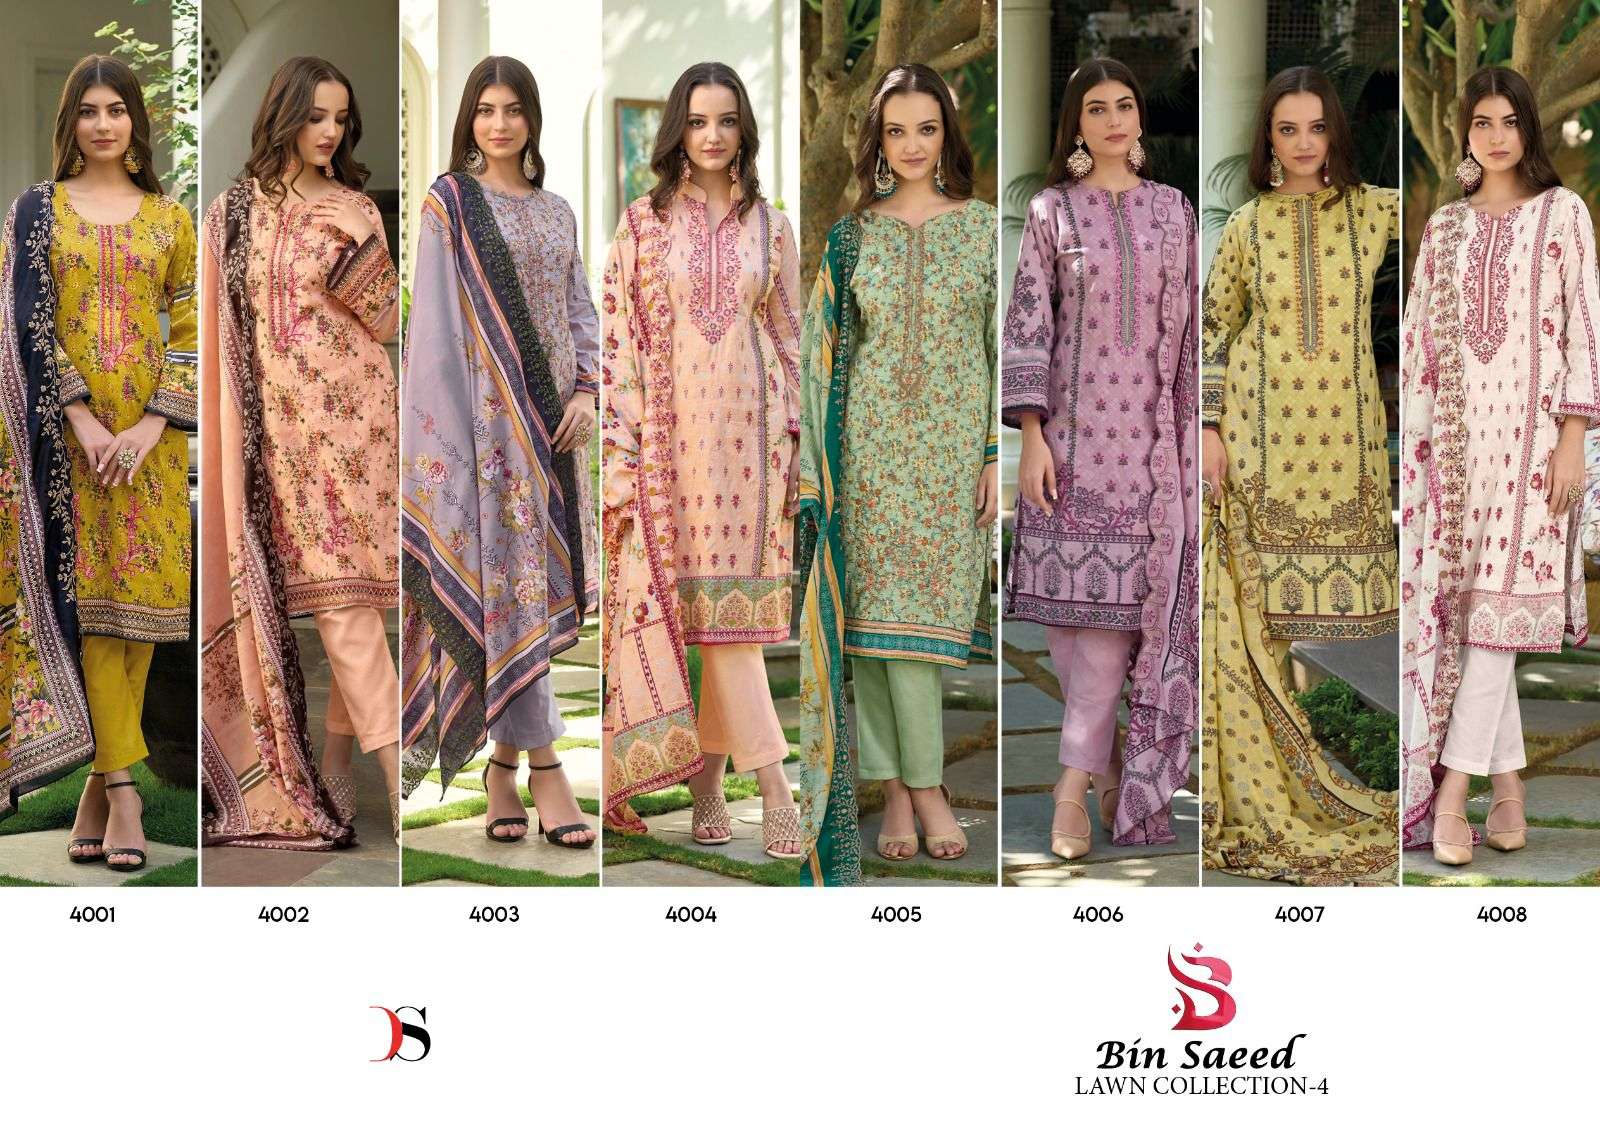 DEEPSY SUITS BIN SAEED LAWN COLLECTION VOL 4